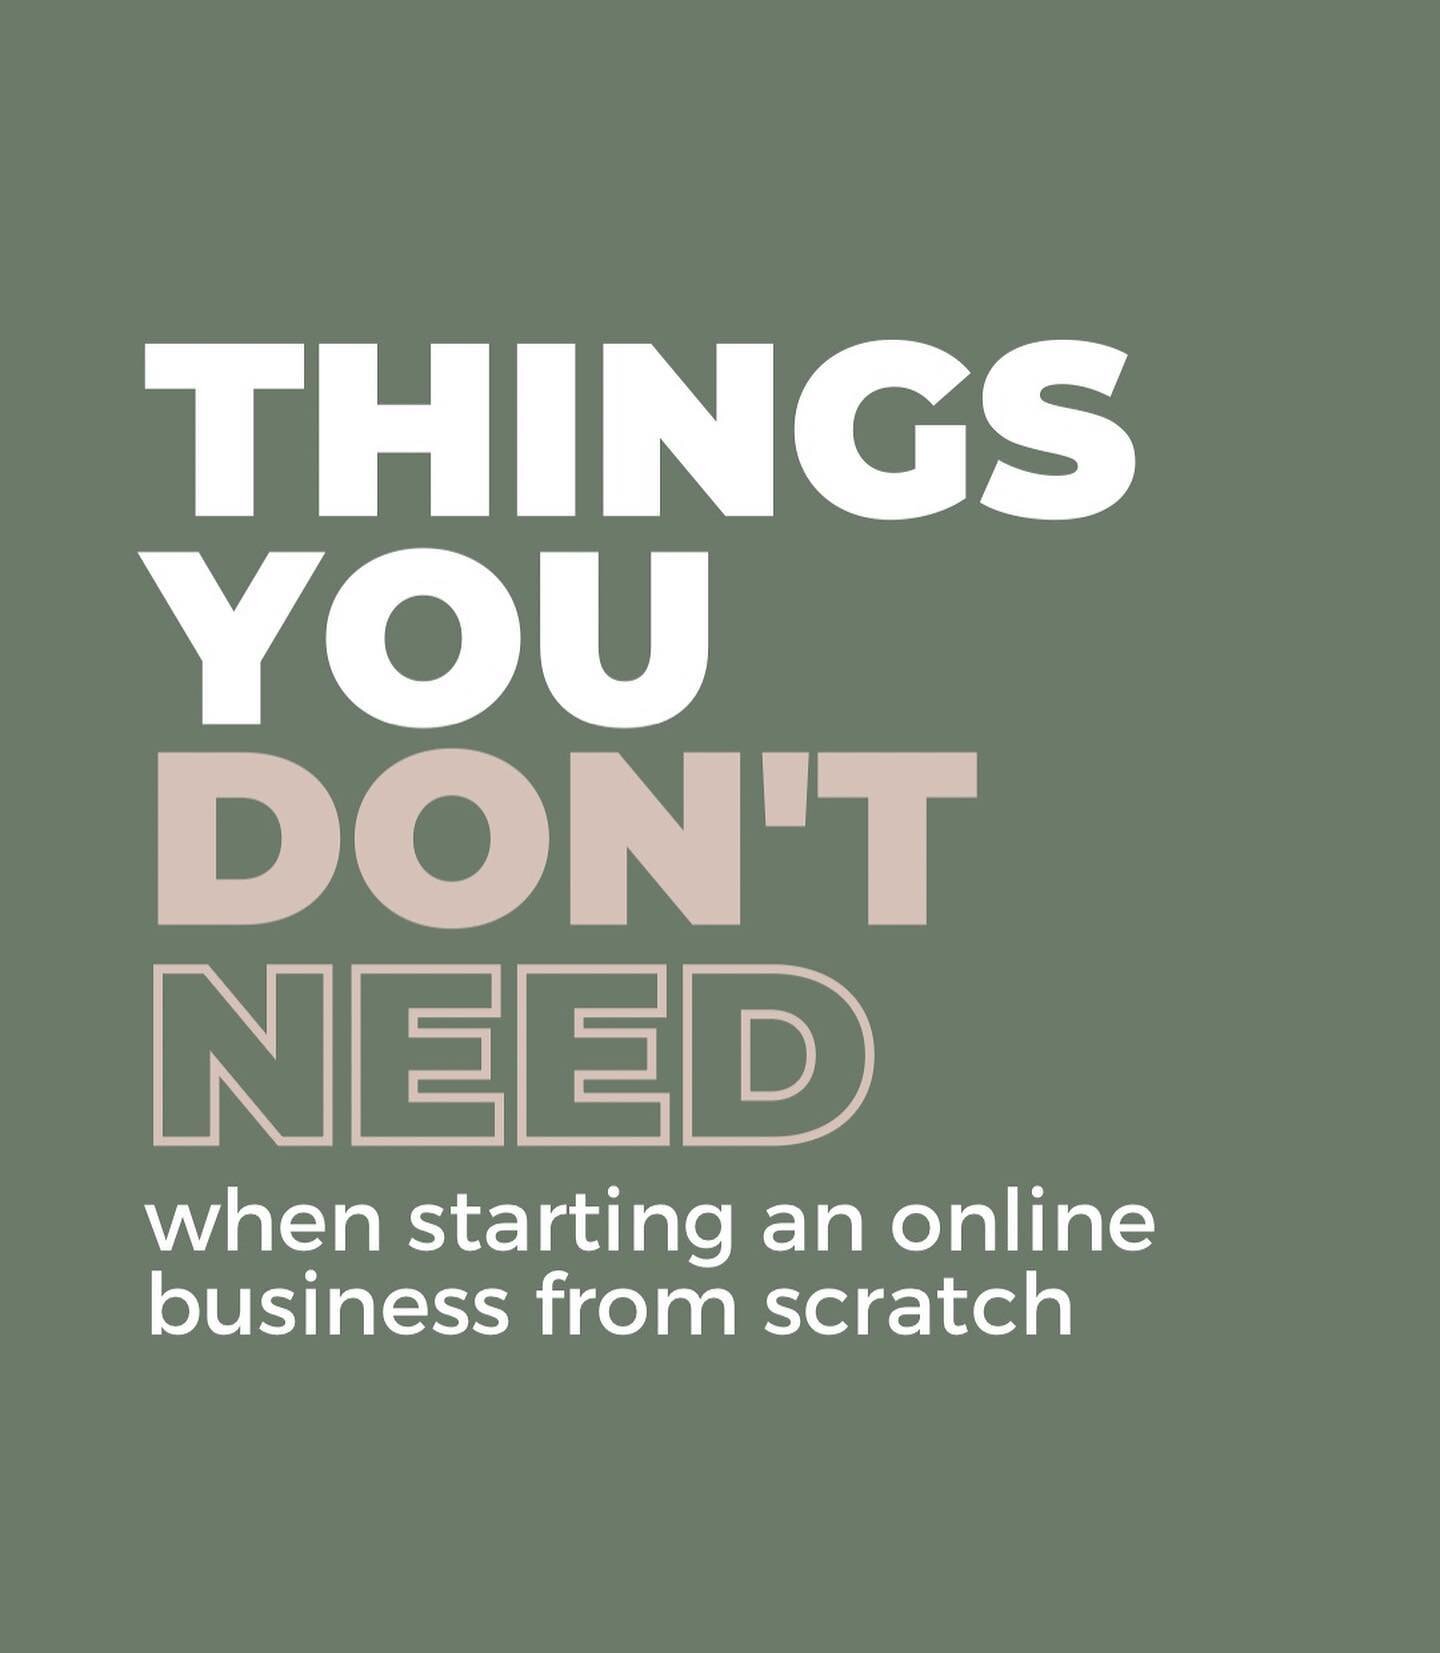 You only need 3 things when starting an online business&hellip;T H R E E&hellip;that&rsquo;s it. 

Swipe ➡️ to see what those 3 things are

Also, I&rsquo;m curious, which one of the 8 &ldquo;don&rsquo;t need&rdquo; items surprised you MOST?! Comment 